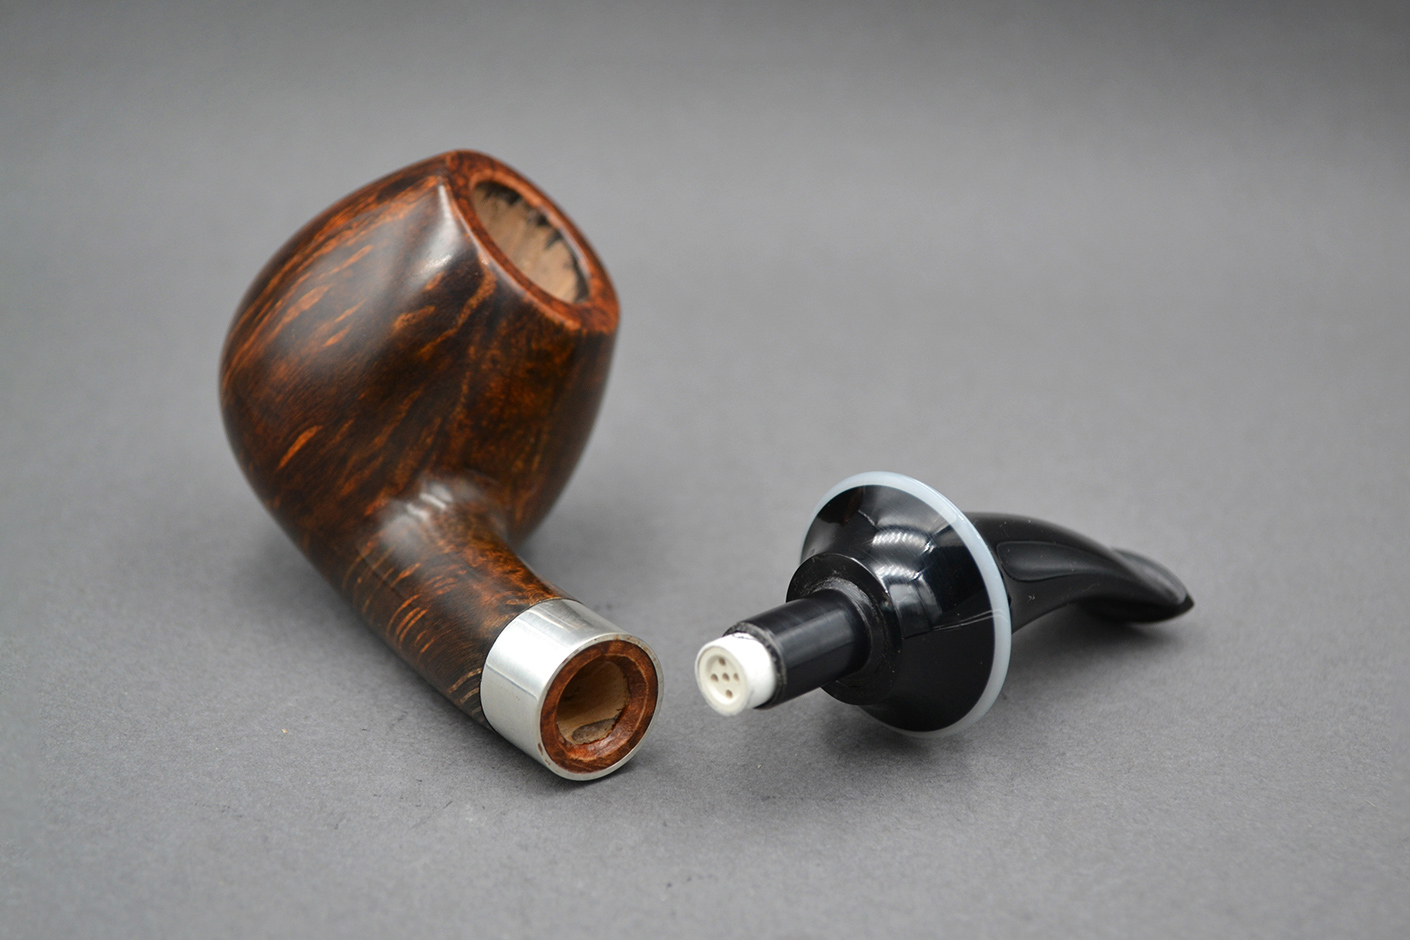 Eccentric 22146 Handmade Briar Tobacco Pipe by Constantinos Zissis 01